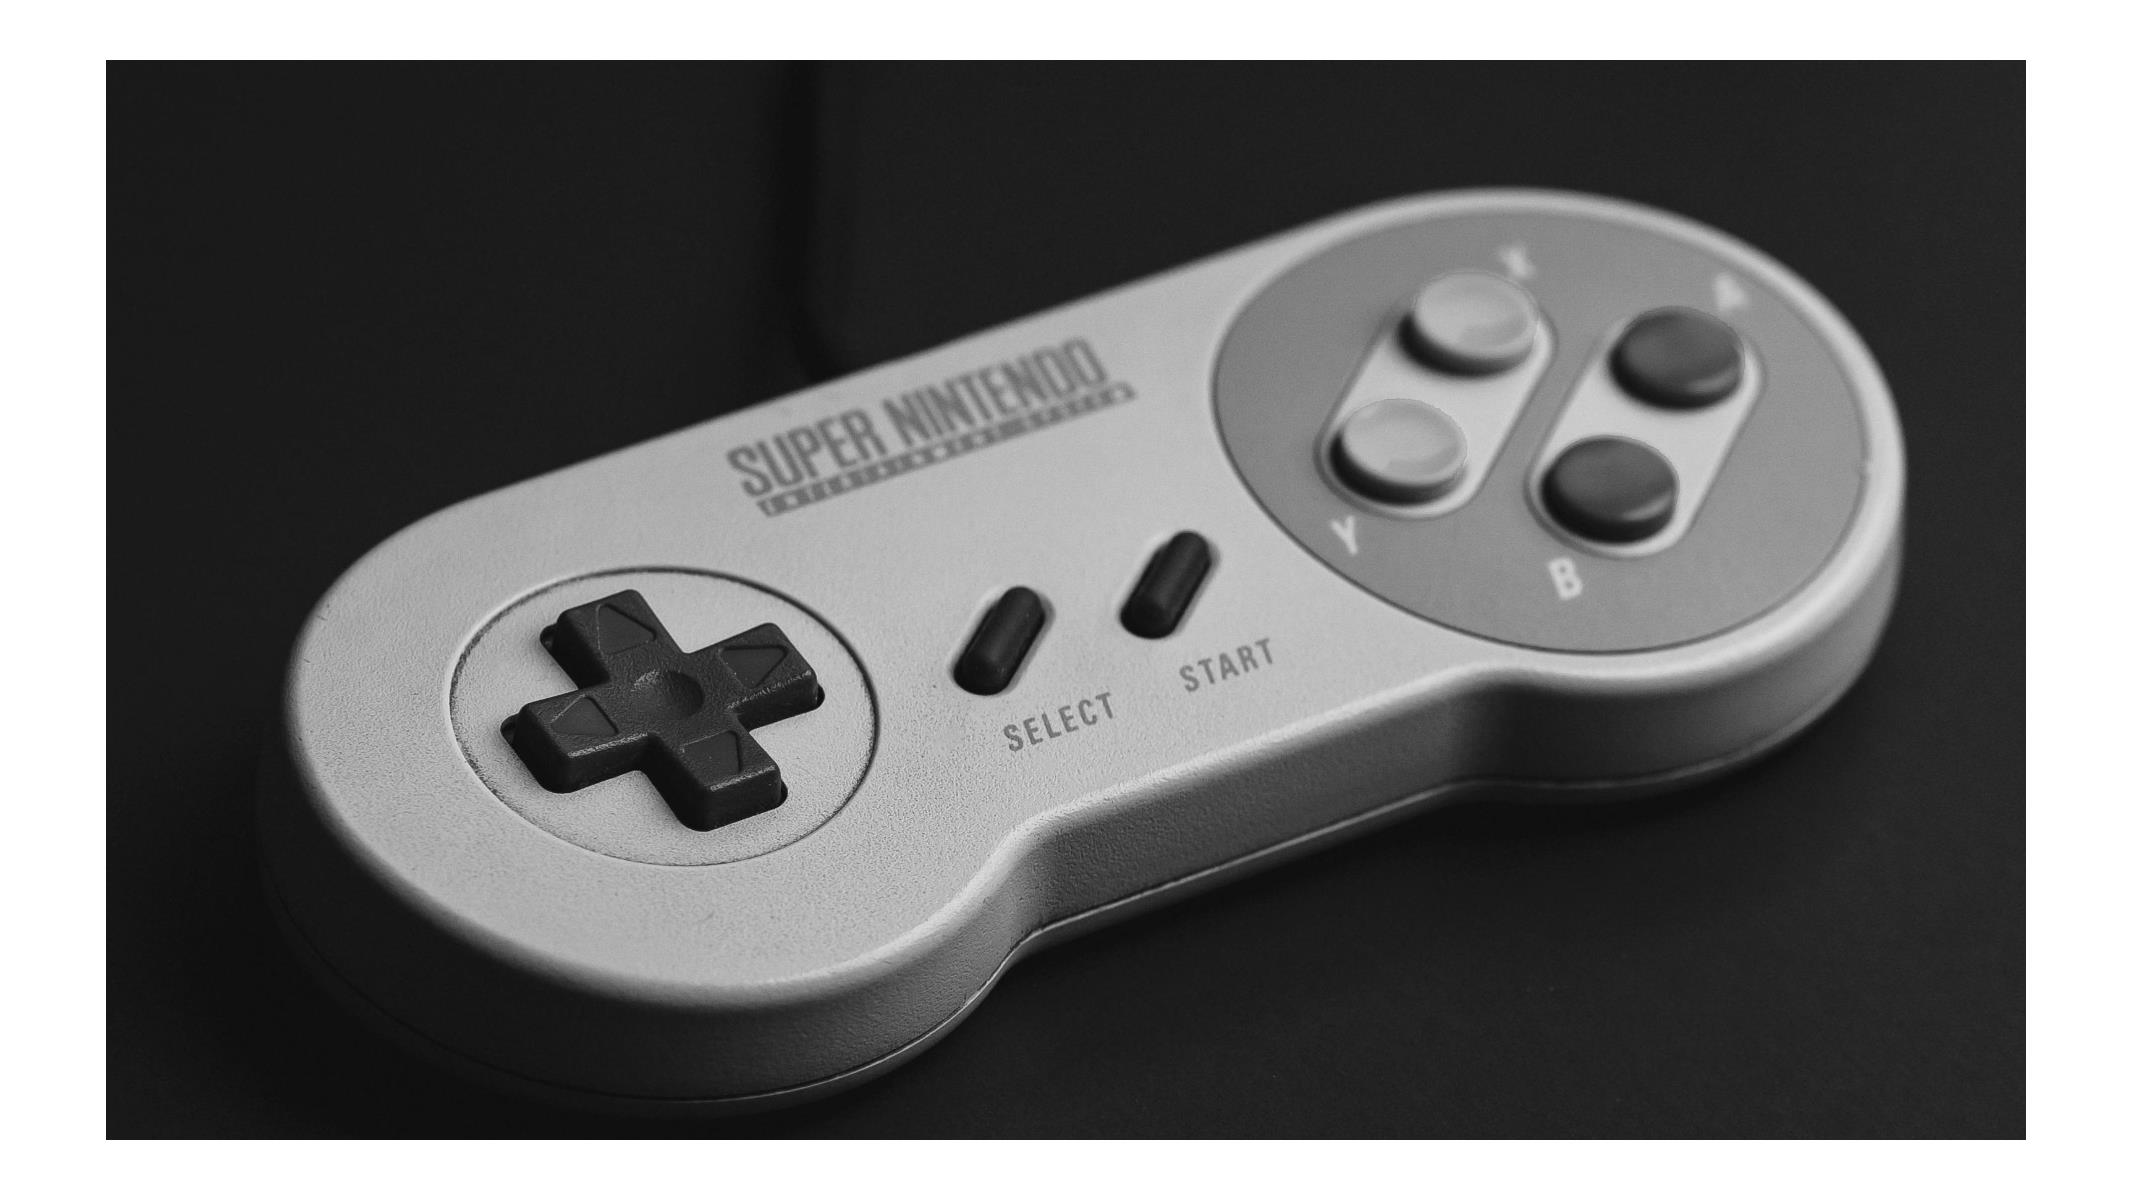 You can now play Steam games with Nintendo classic controllers